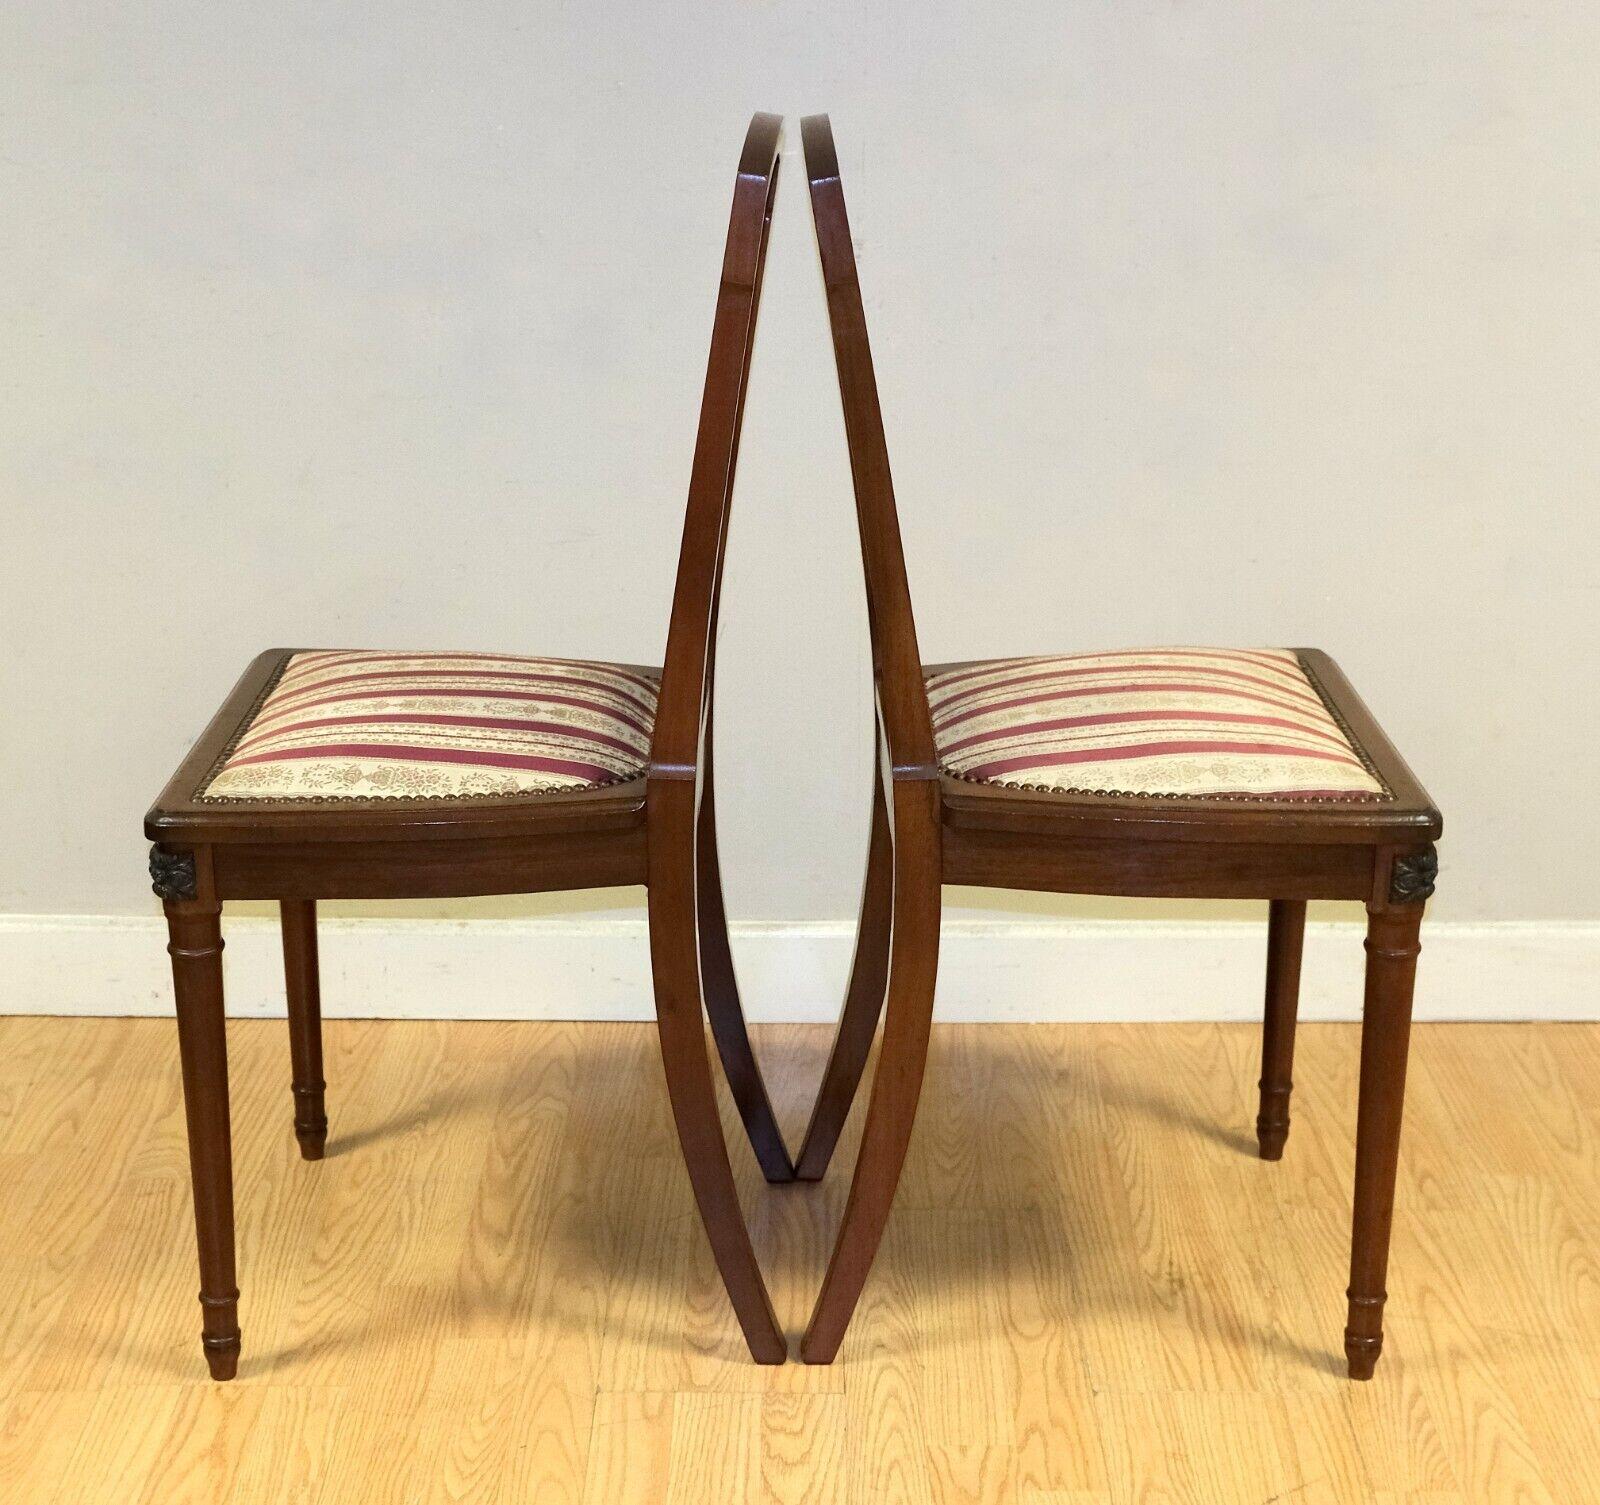 English CHARMING PAIR OF OCCASIONAL HARDWOOD CHAIR WiTH STIPE FABRIC SEAT & STUDS For Sale